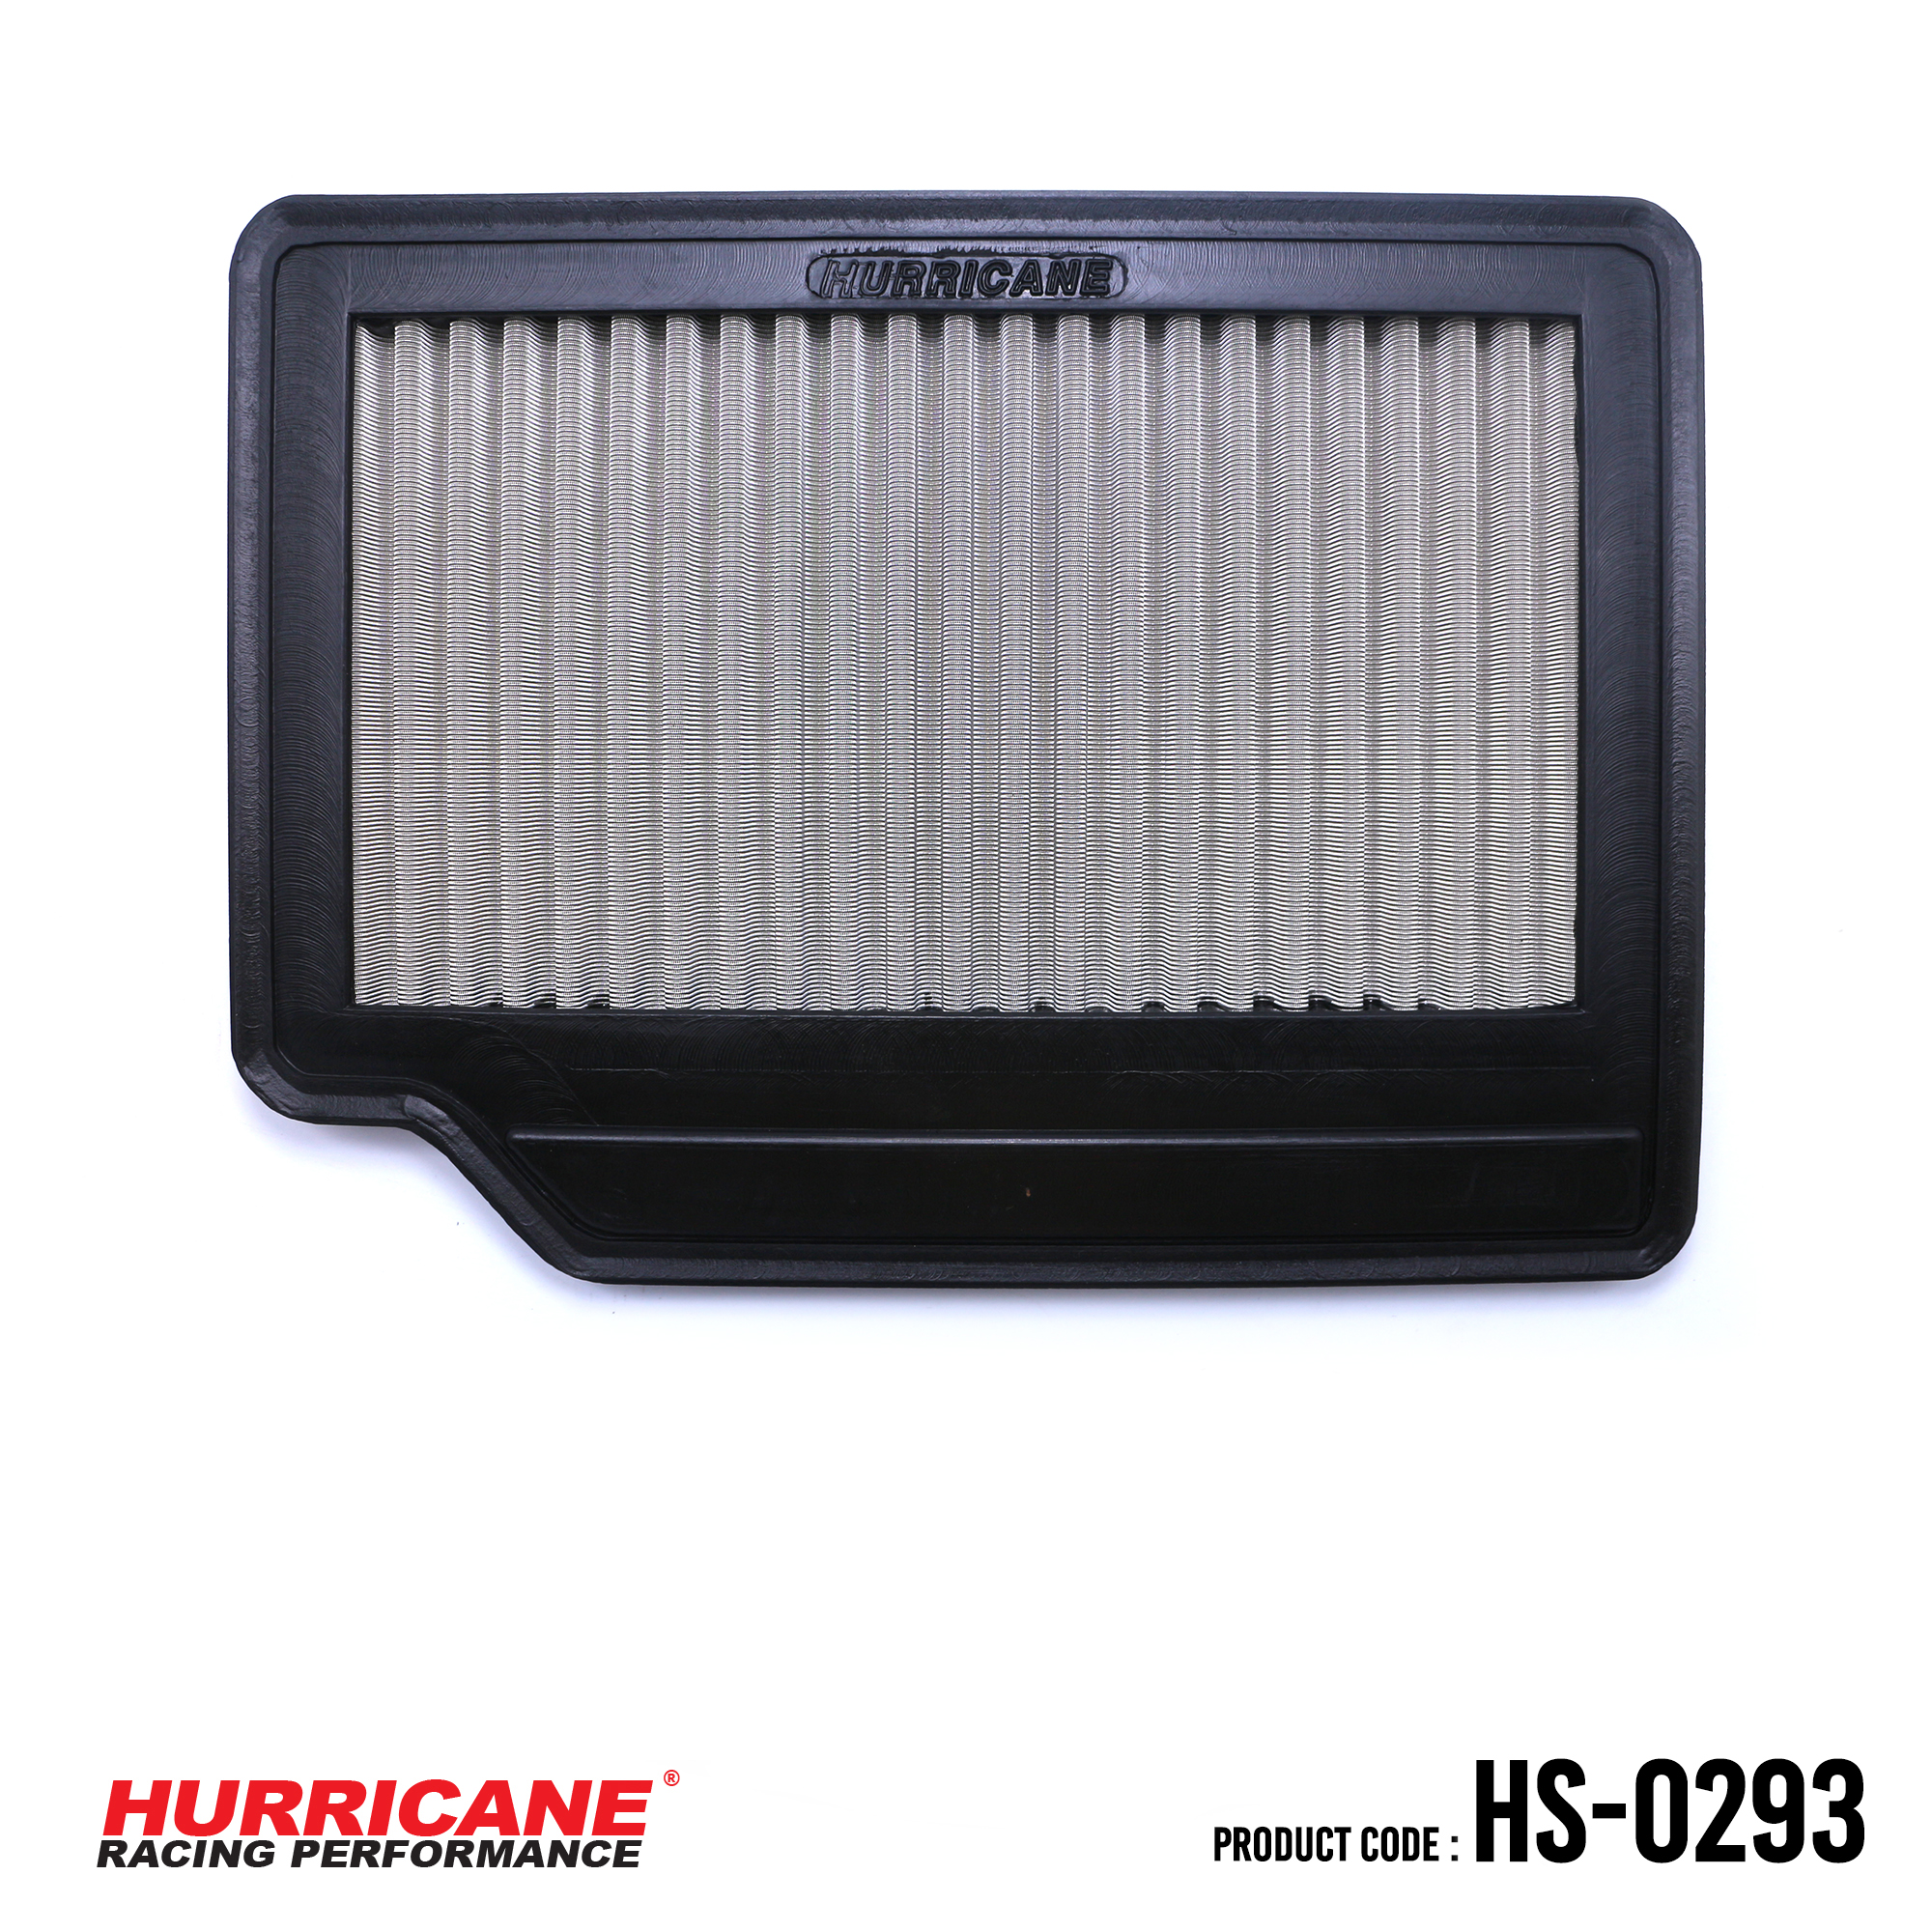 HURRICANE STAINLESS STEEL AIR FILTER FOR HS-0293 Proton